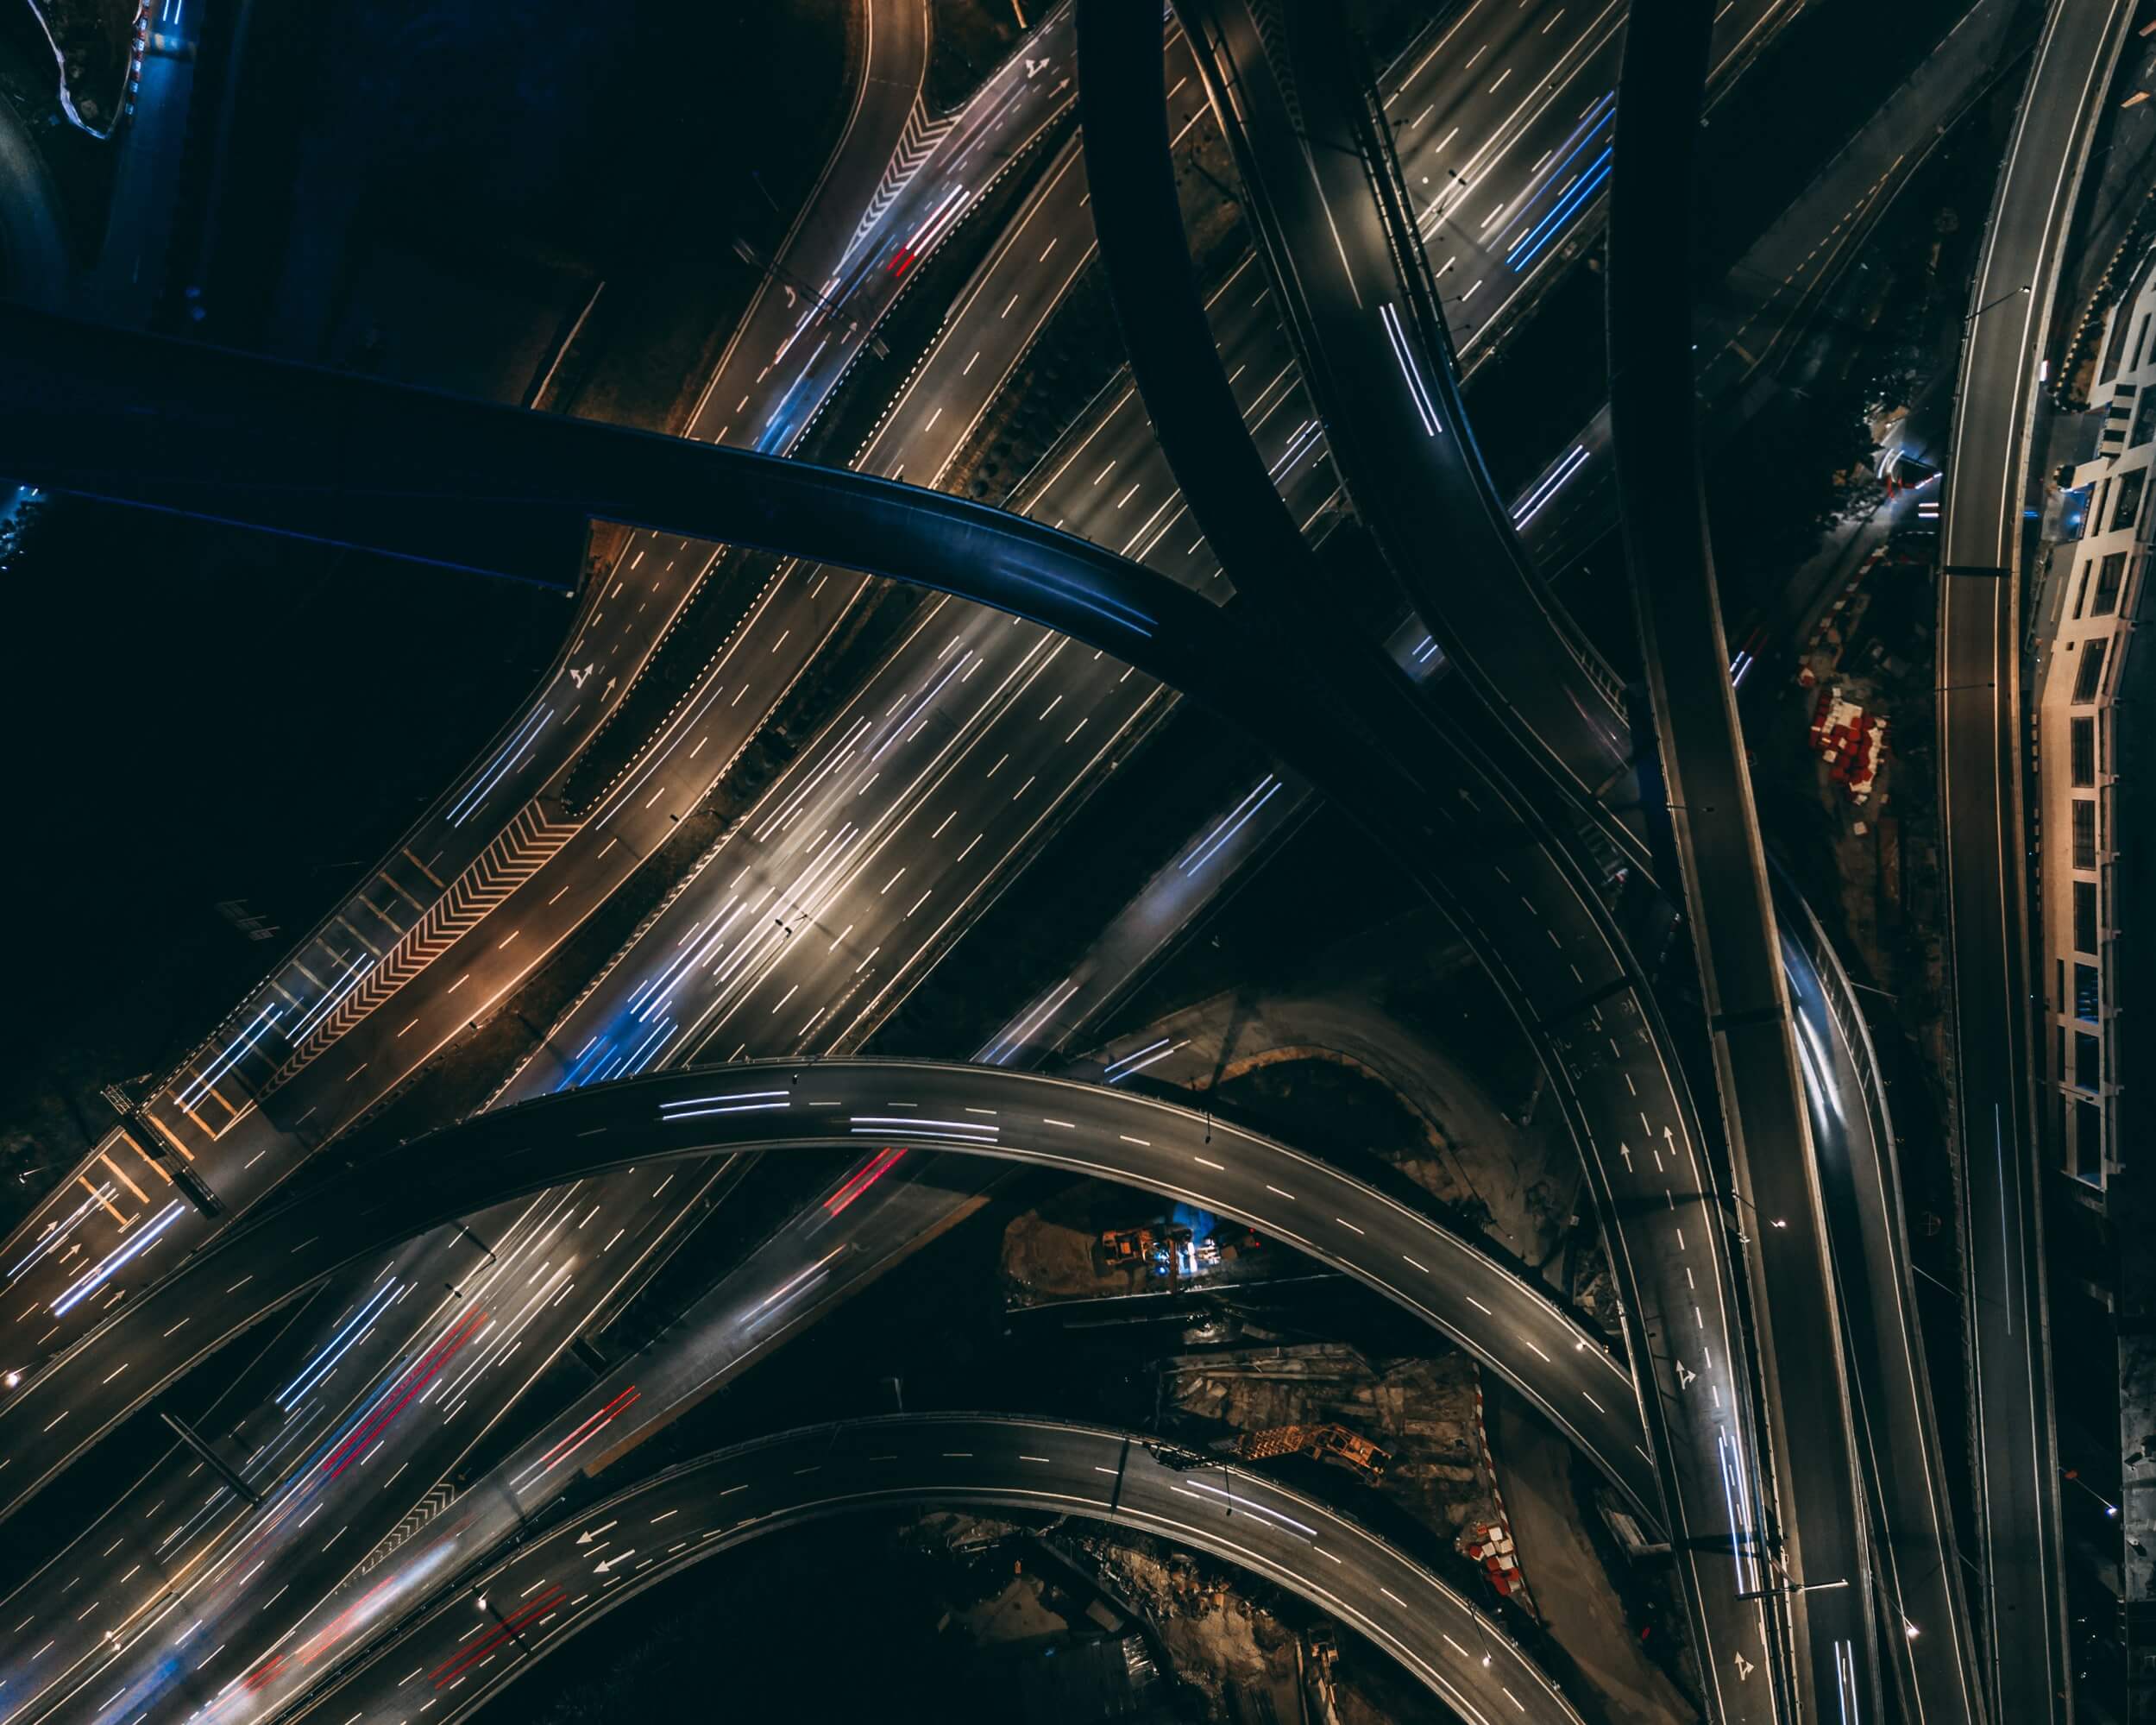 A series of overlapping highways in the dark